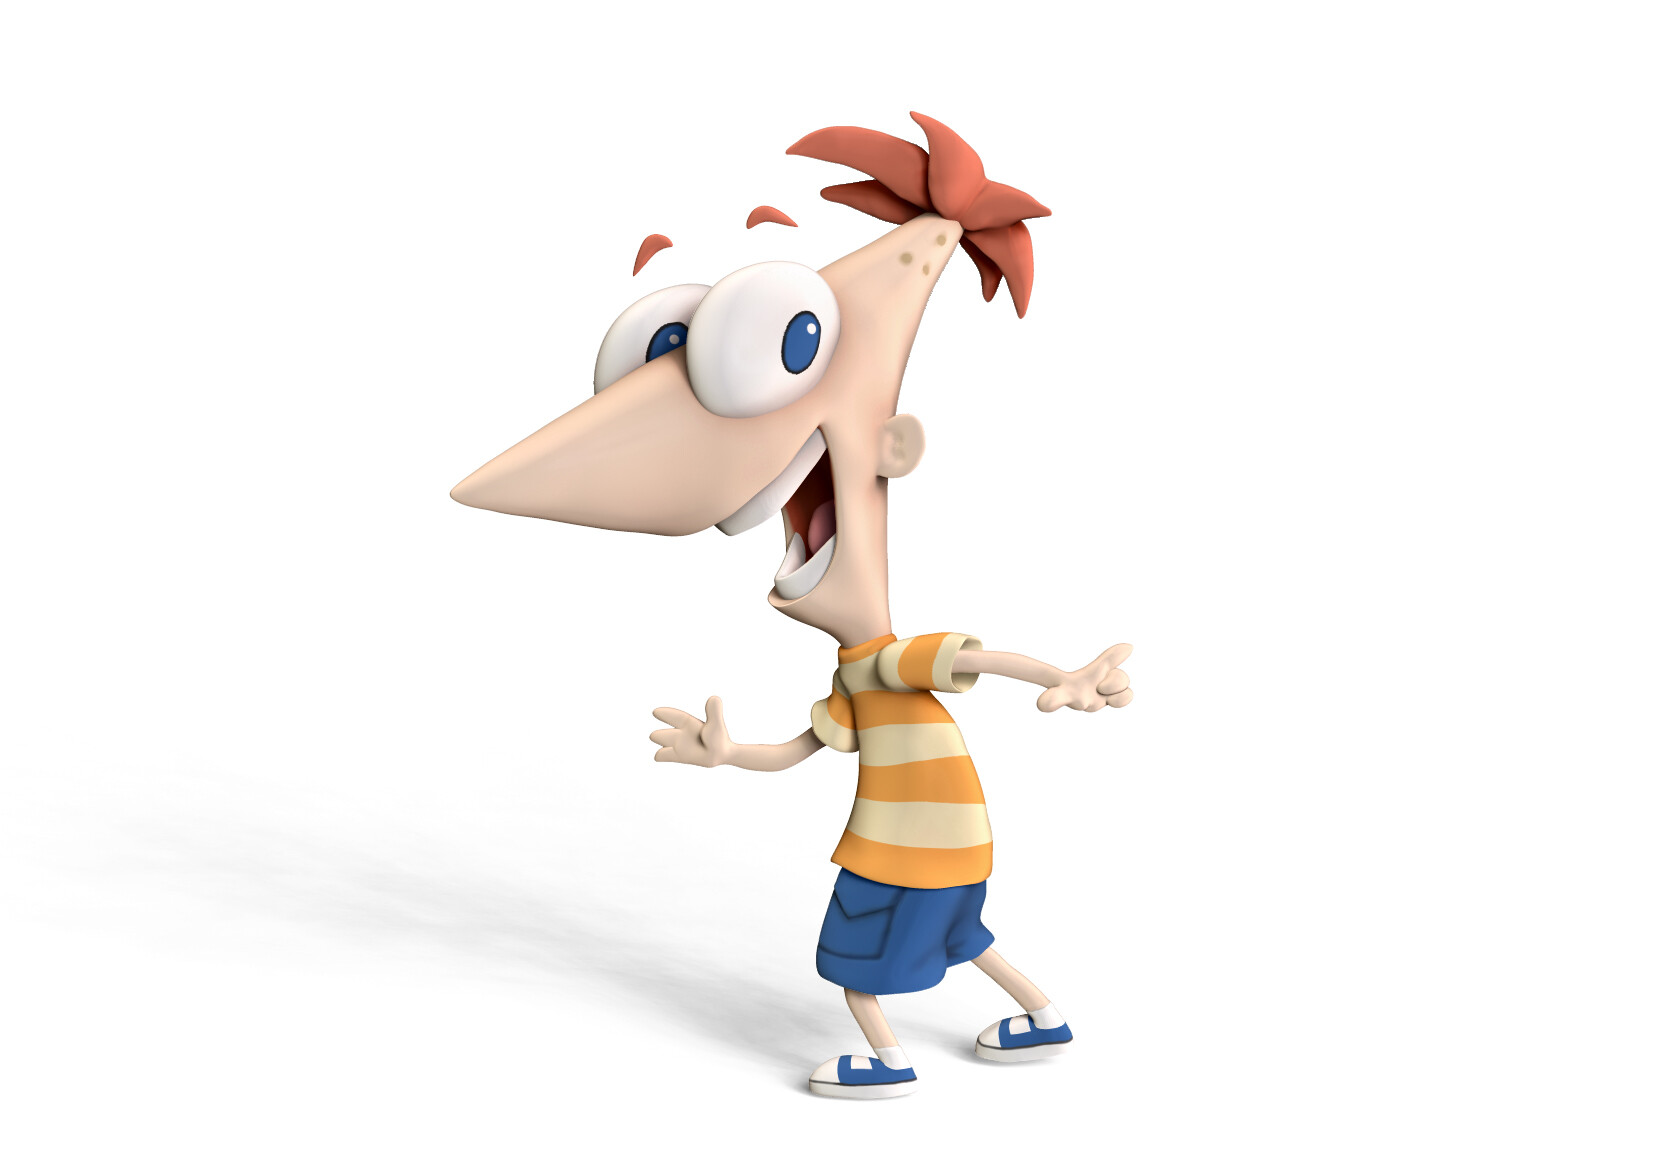 phineas flynn real life